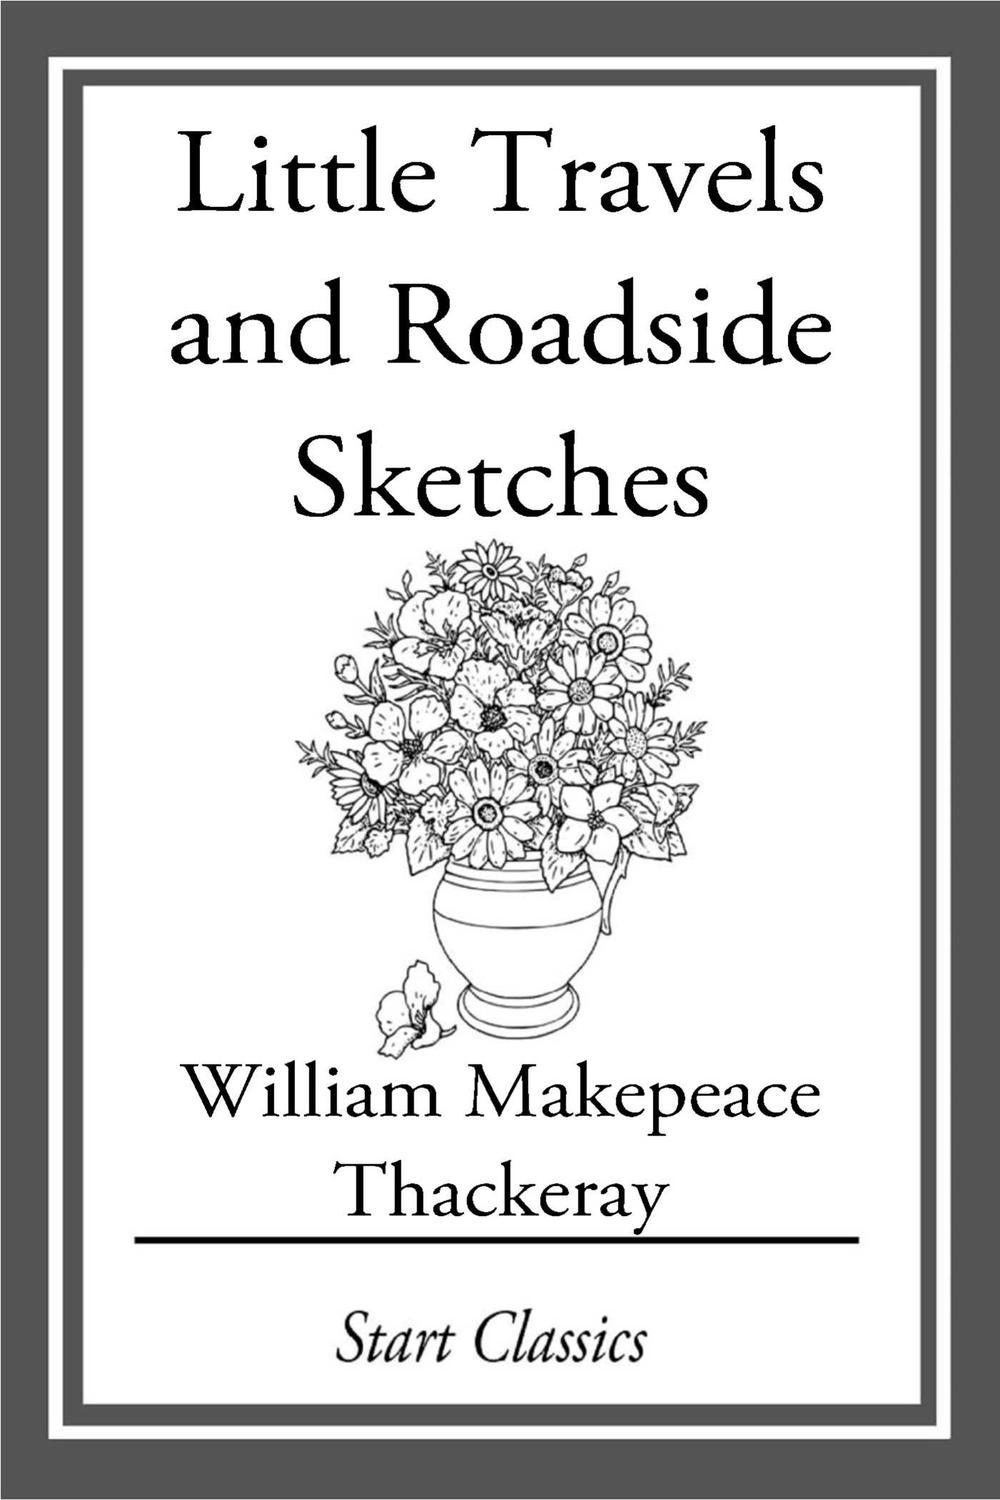 Little Travels and Roadside Sketches - William Makepeace Thackeray